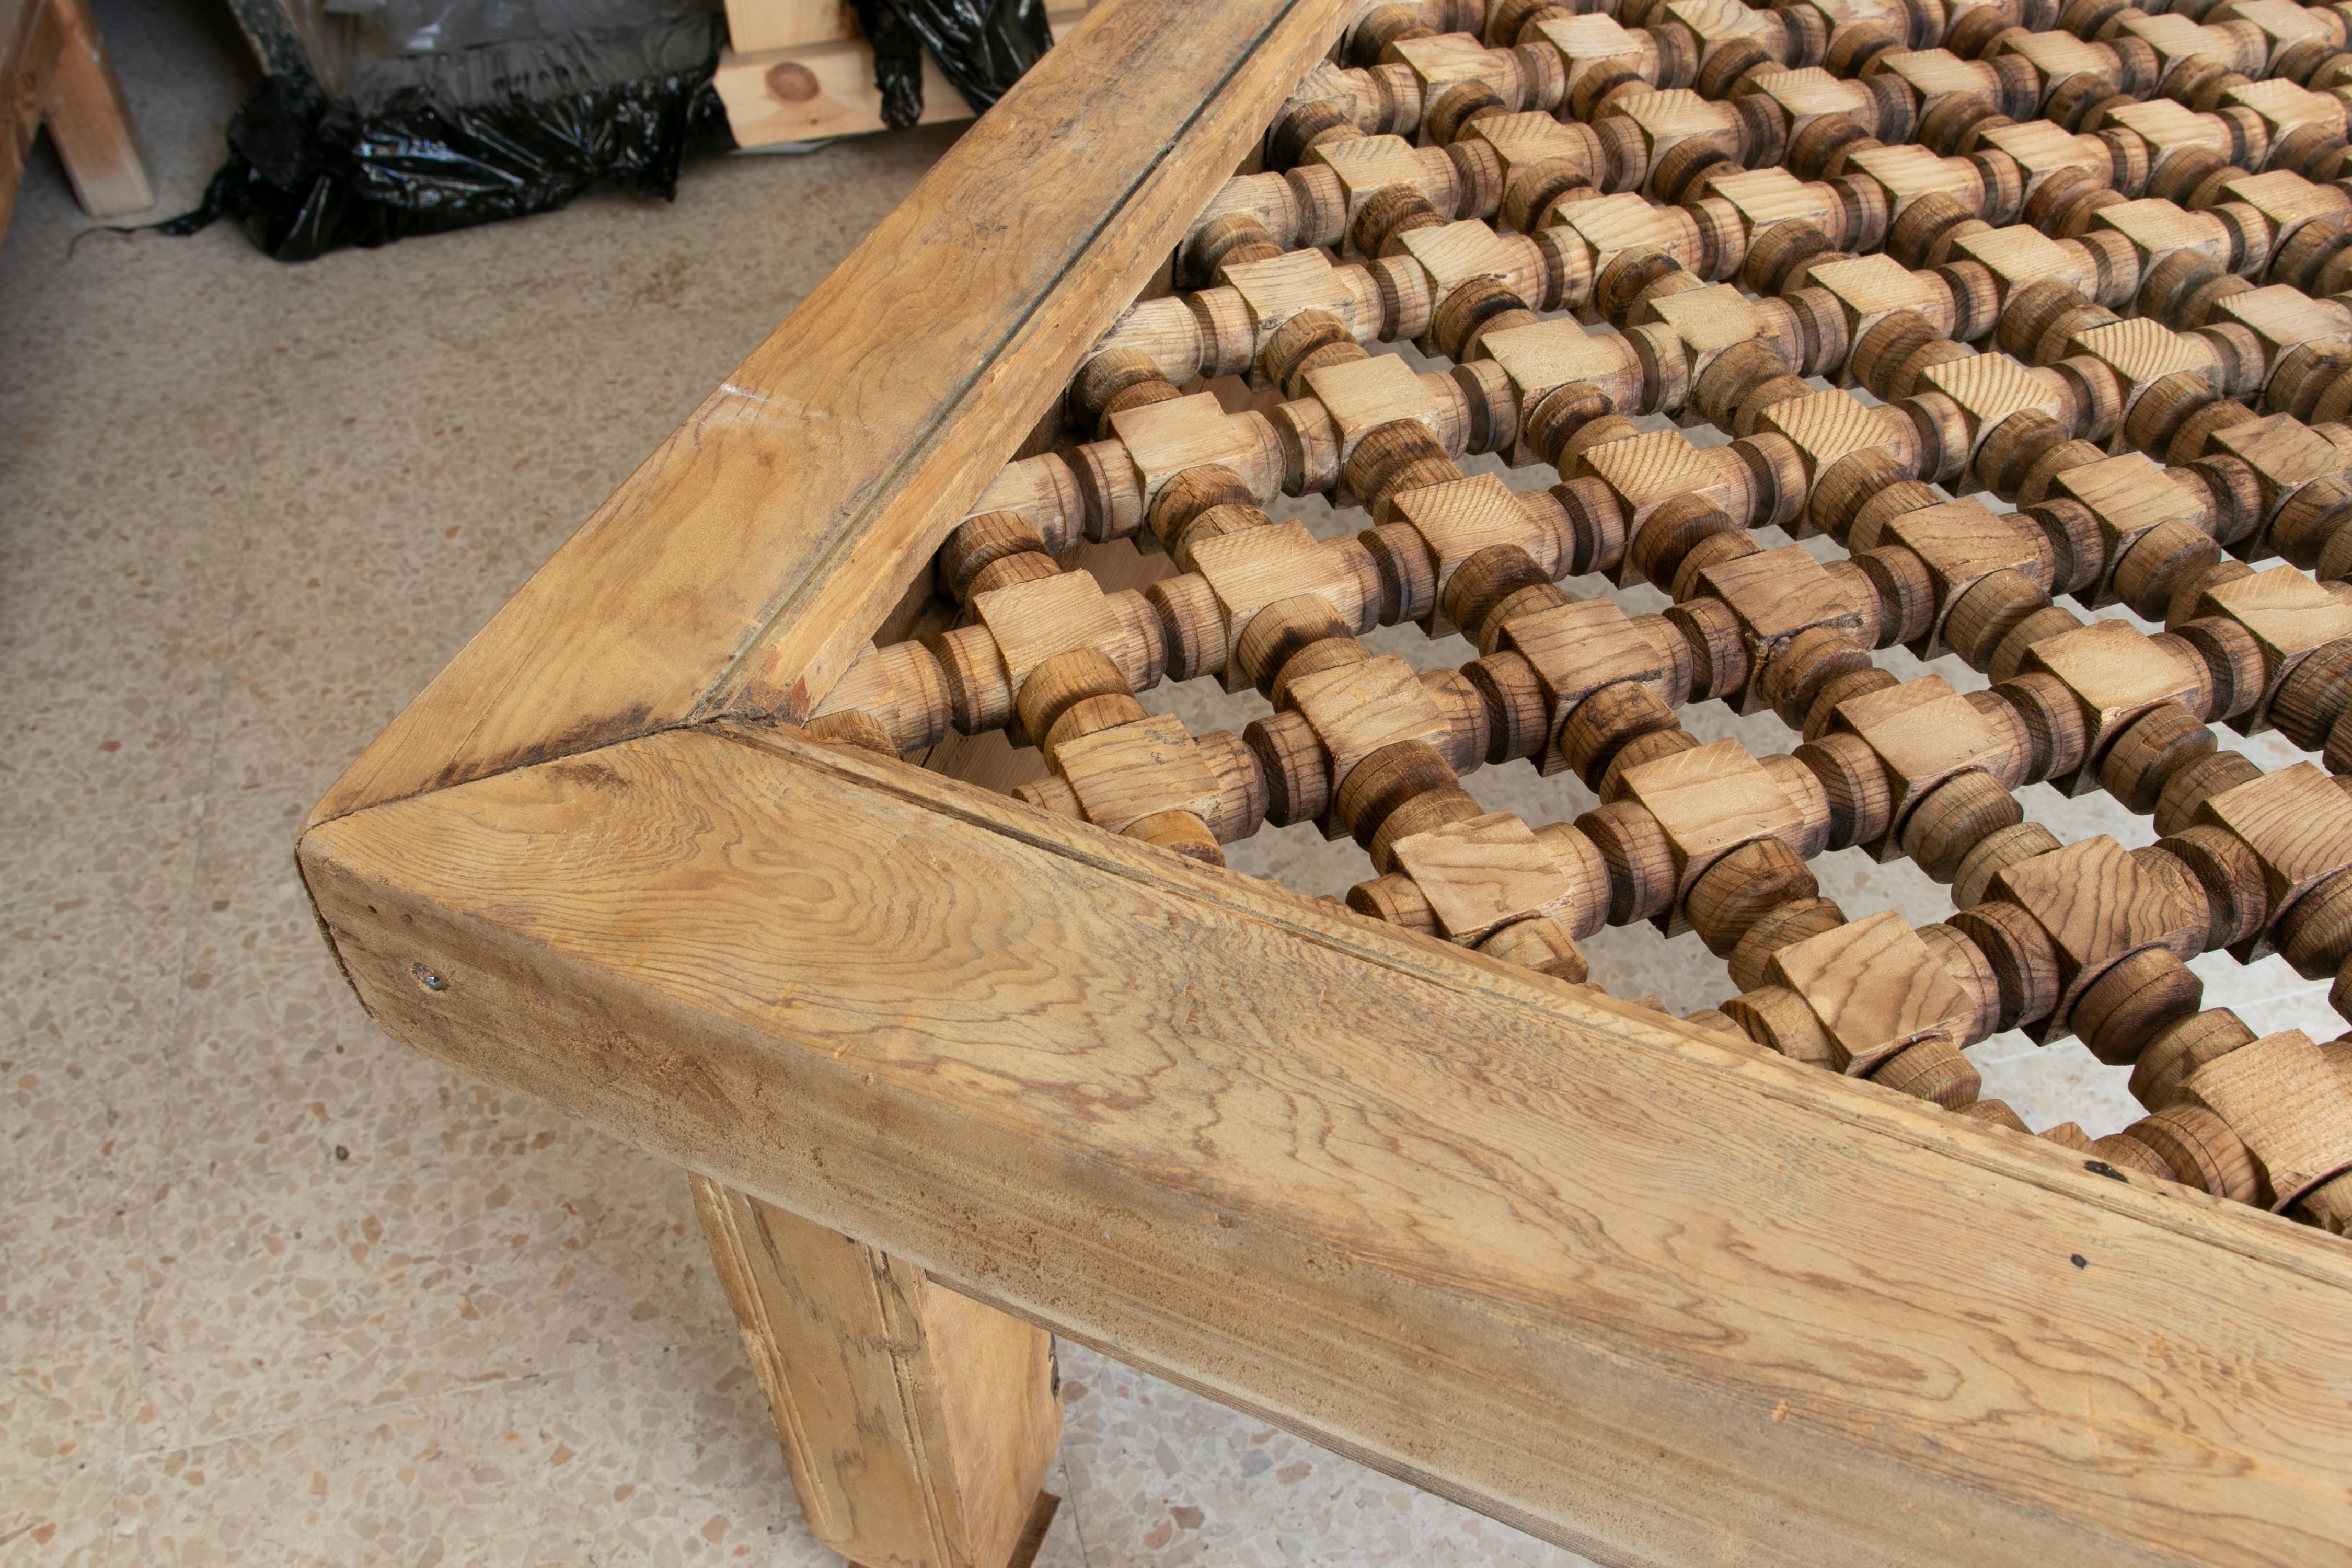 20th Century Hand-Carved Wooden Coffee Table with Lattice on Top